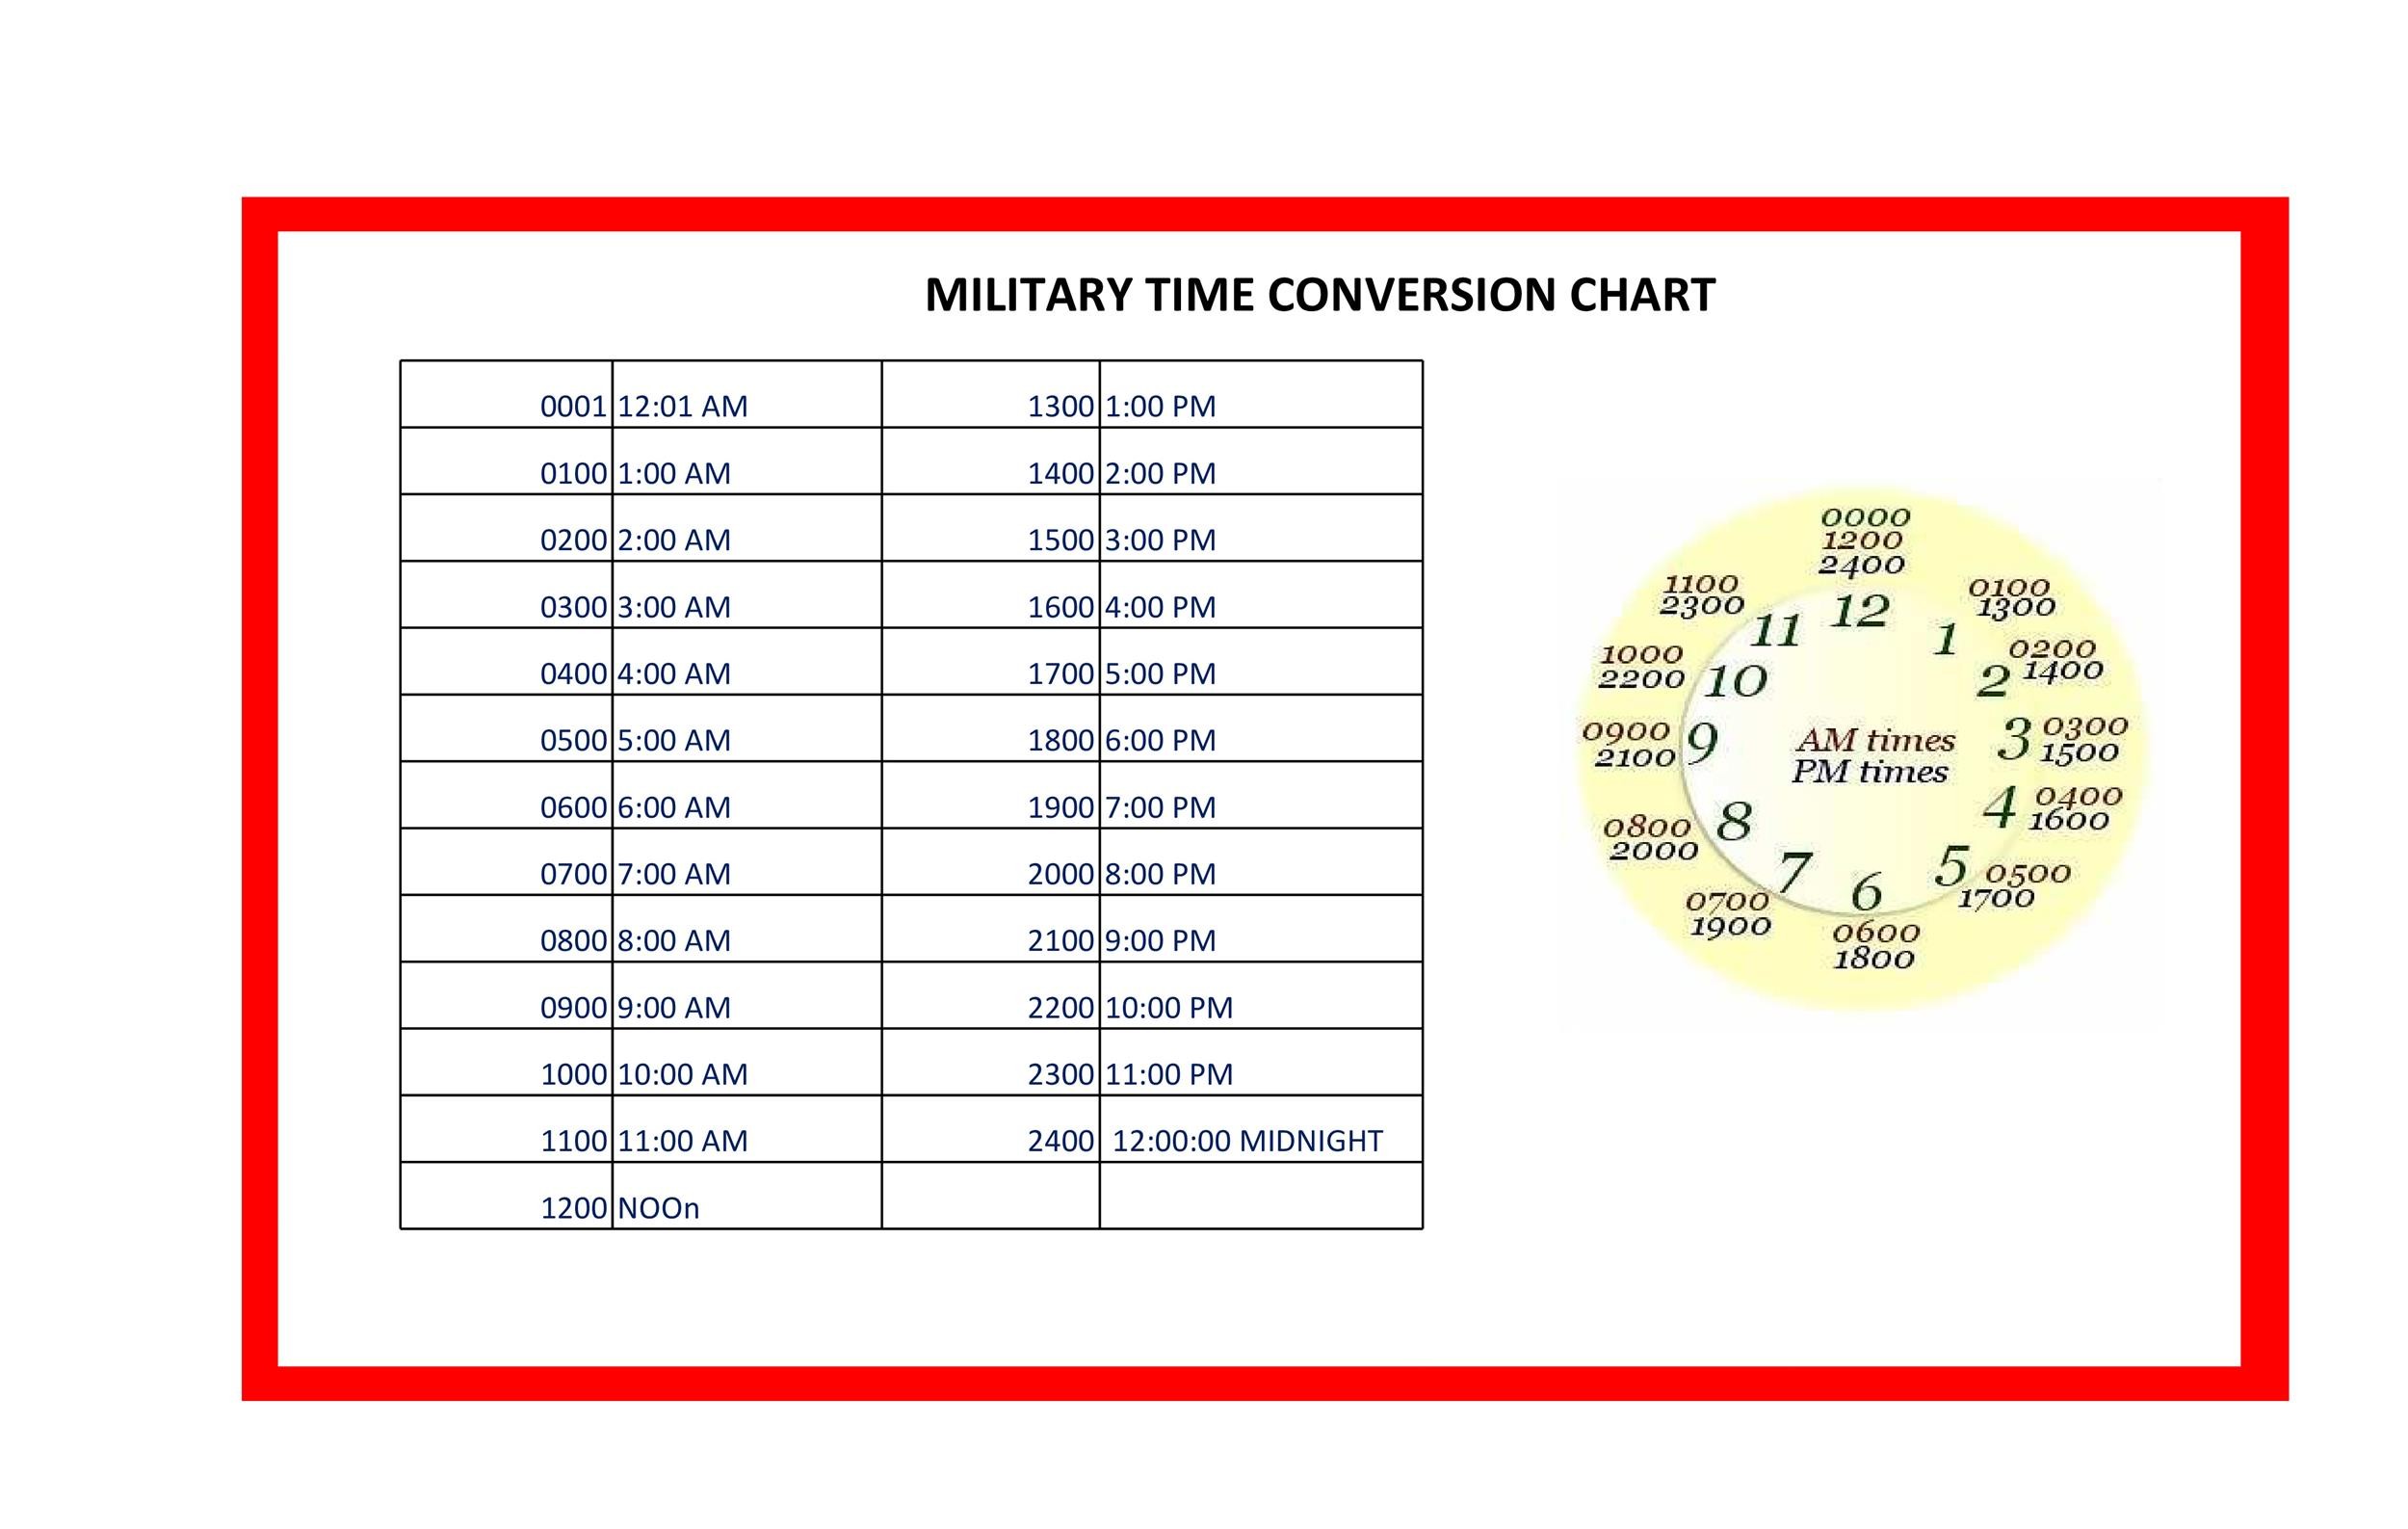 Military Time Pay Chart